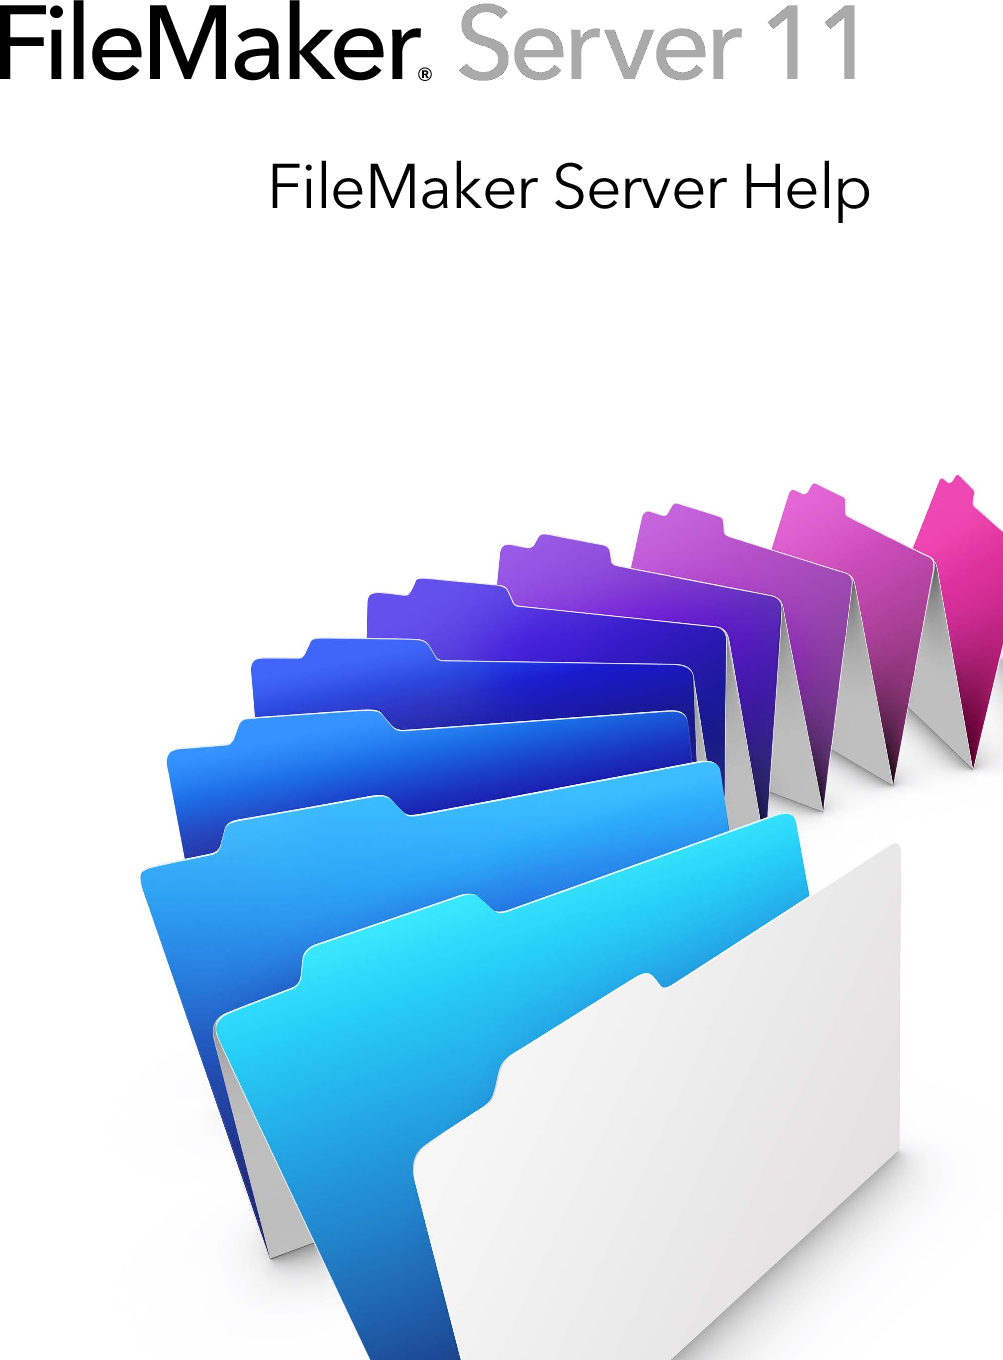 filemaker pro 11 upgrade requirements